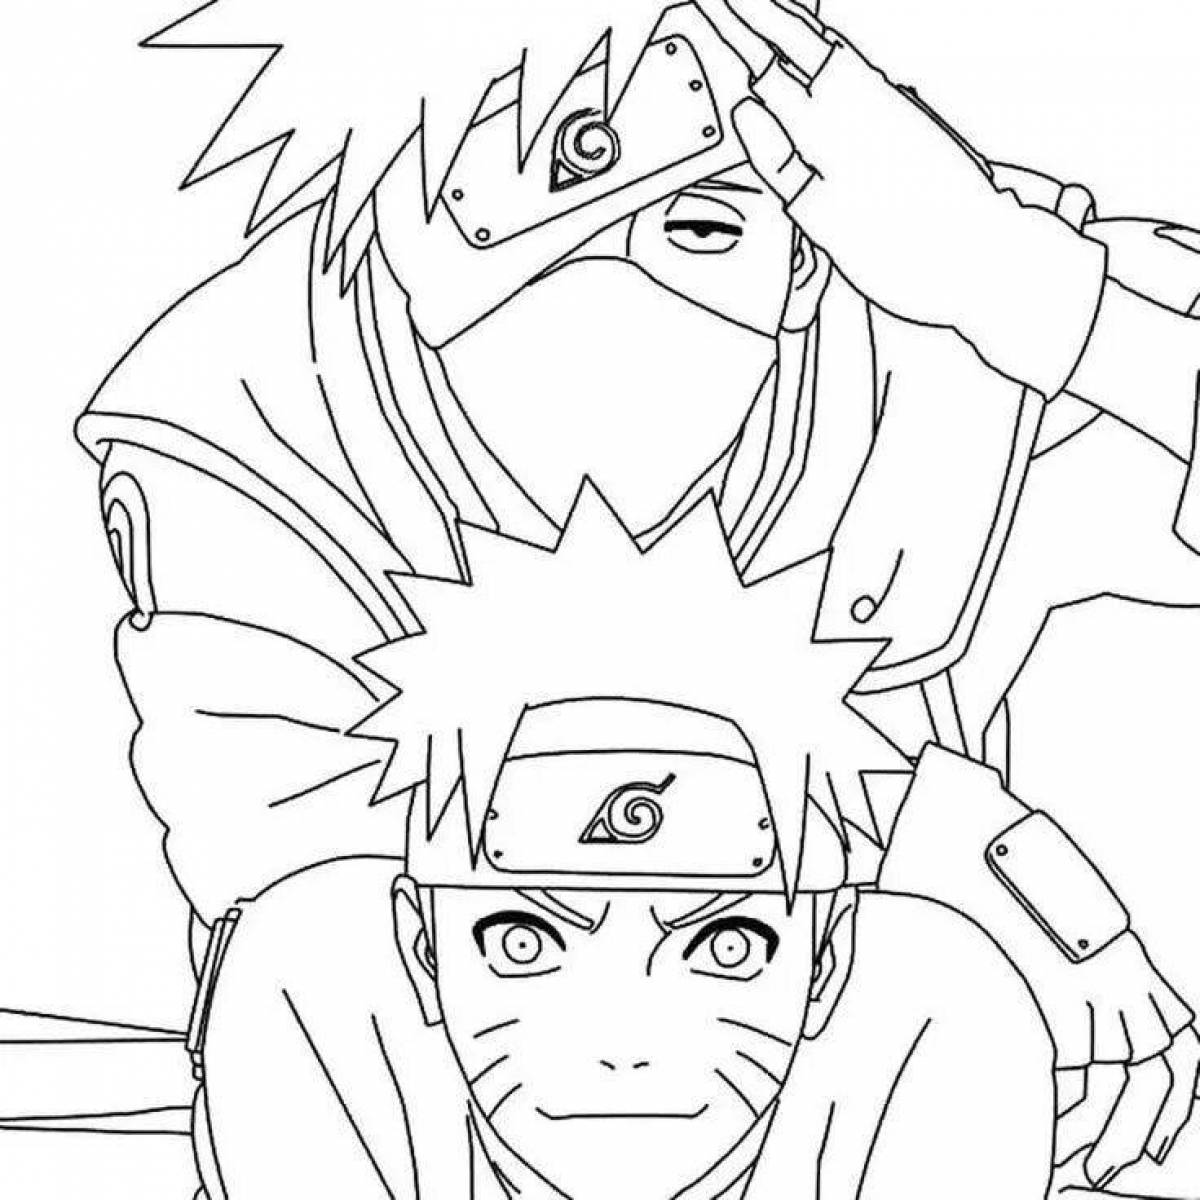 A fascinating coloring book for girls 12 years old - naruto